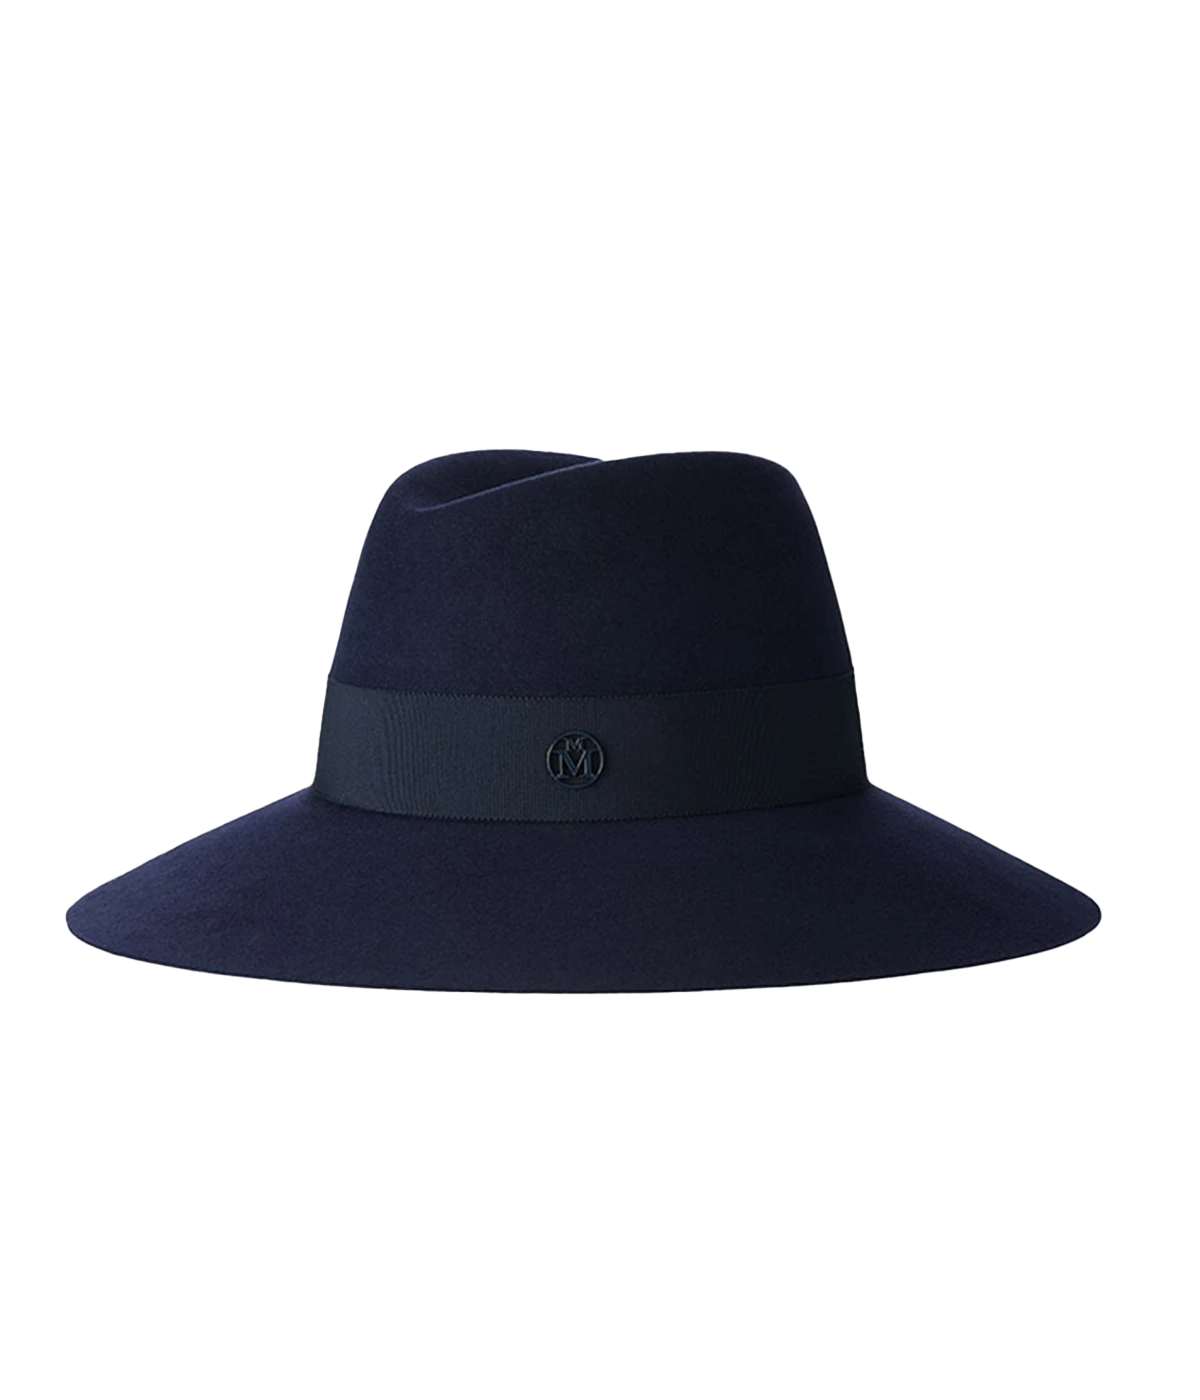 Wool felt waterproof navy fedora hat. Timeless and elegant accessory to add style to any look. 